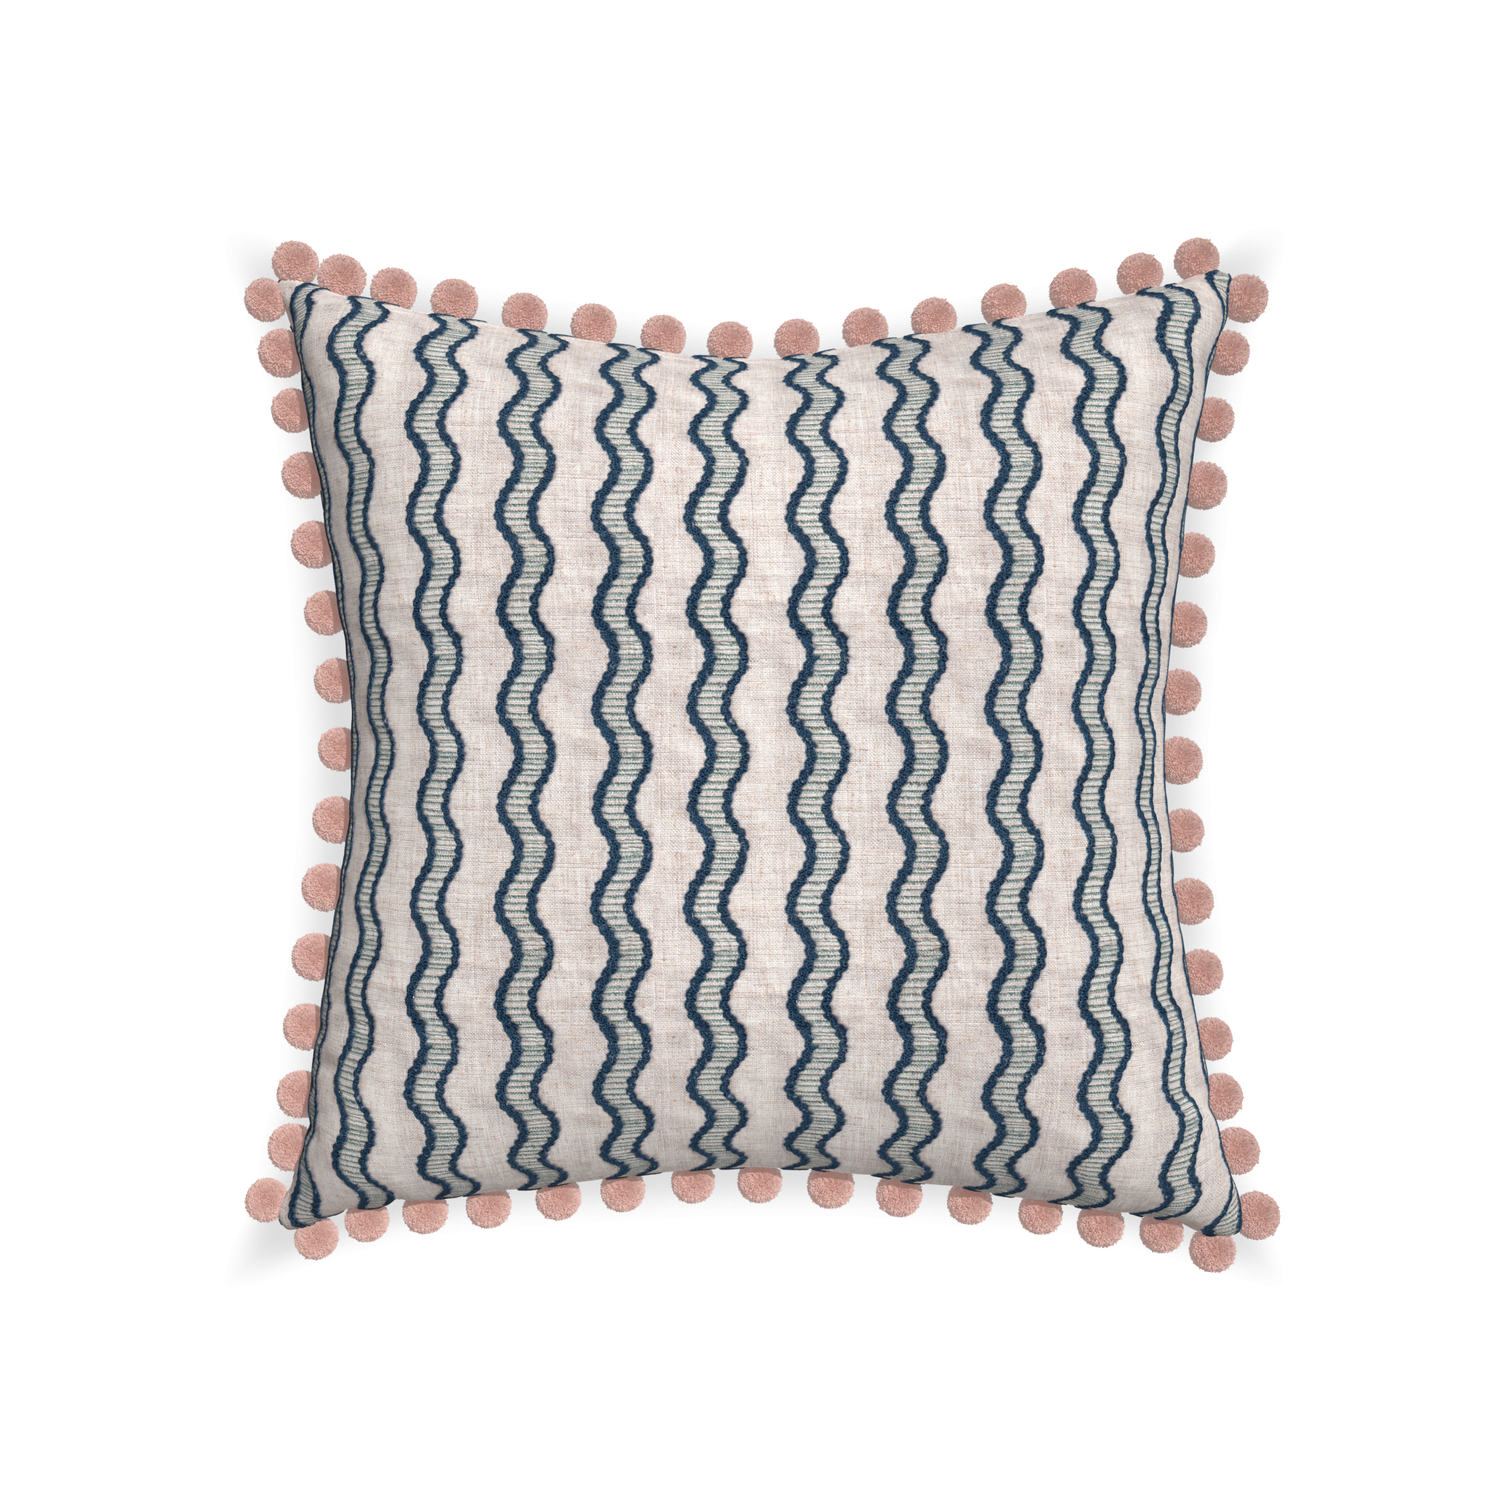 22-square beatrice custom embroidered wavepillow with rose pom pom on white background